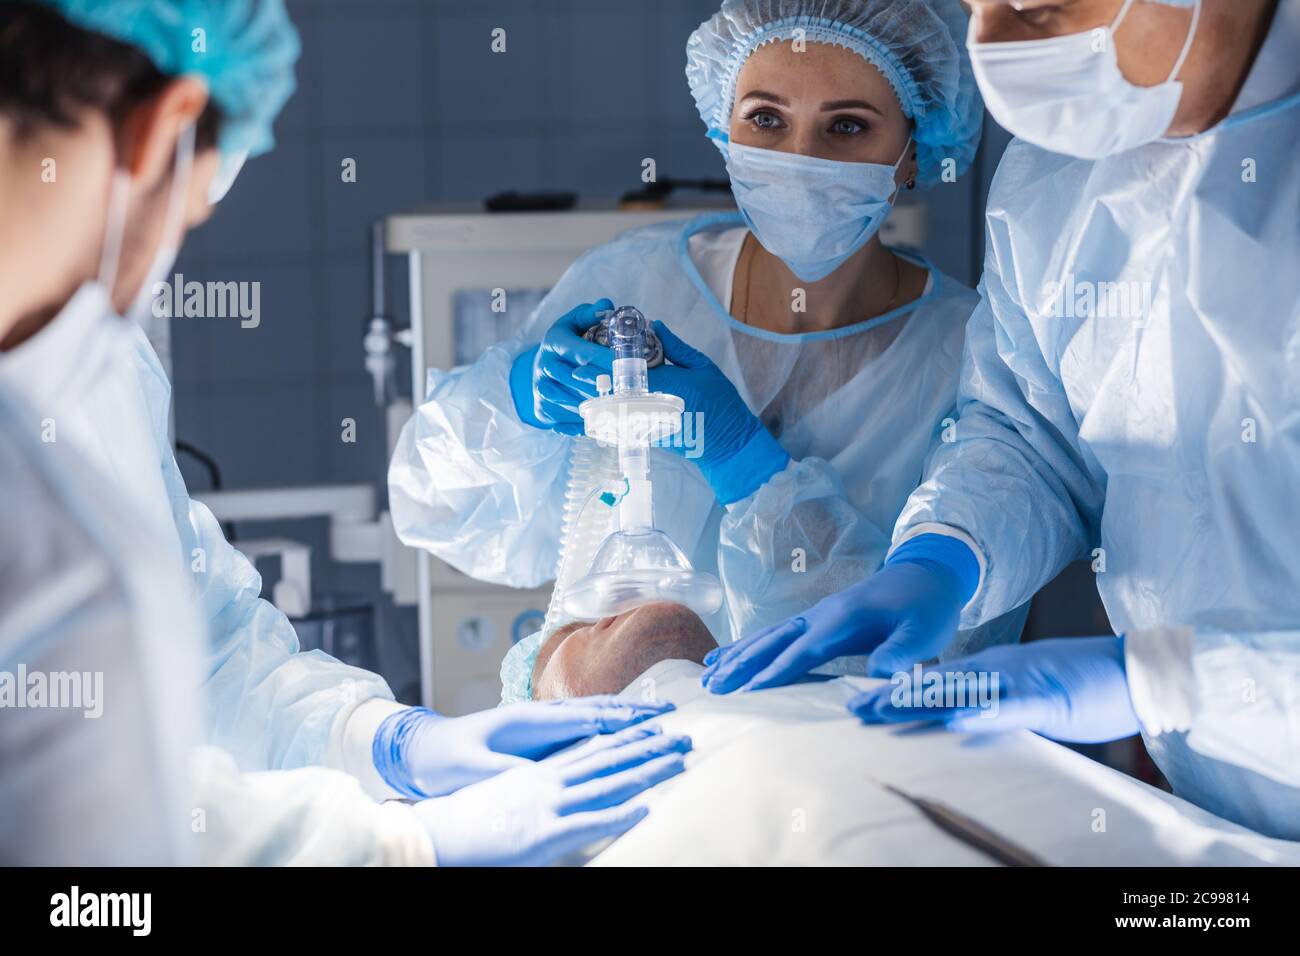 Female nurses putting oxygen mask on patient in operation room. Pre oxygenation for general anesthesia. Surgery equipment Stock Photo